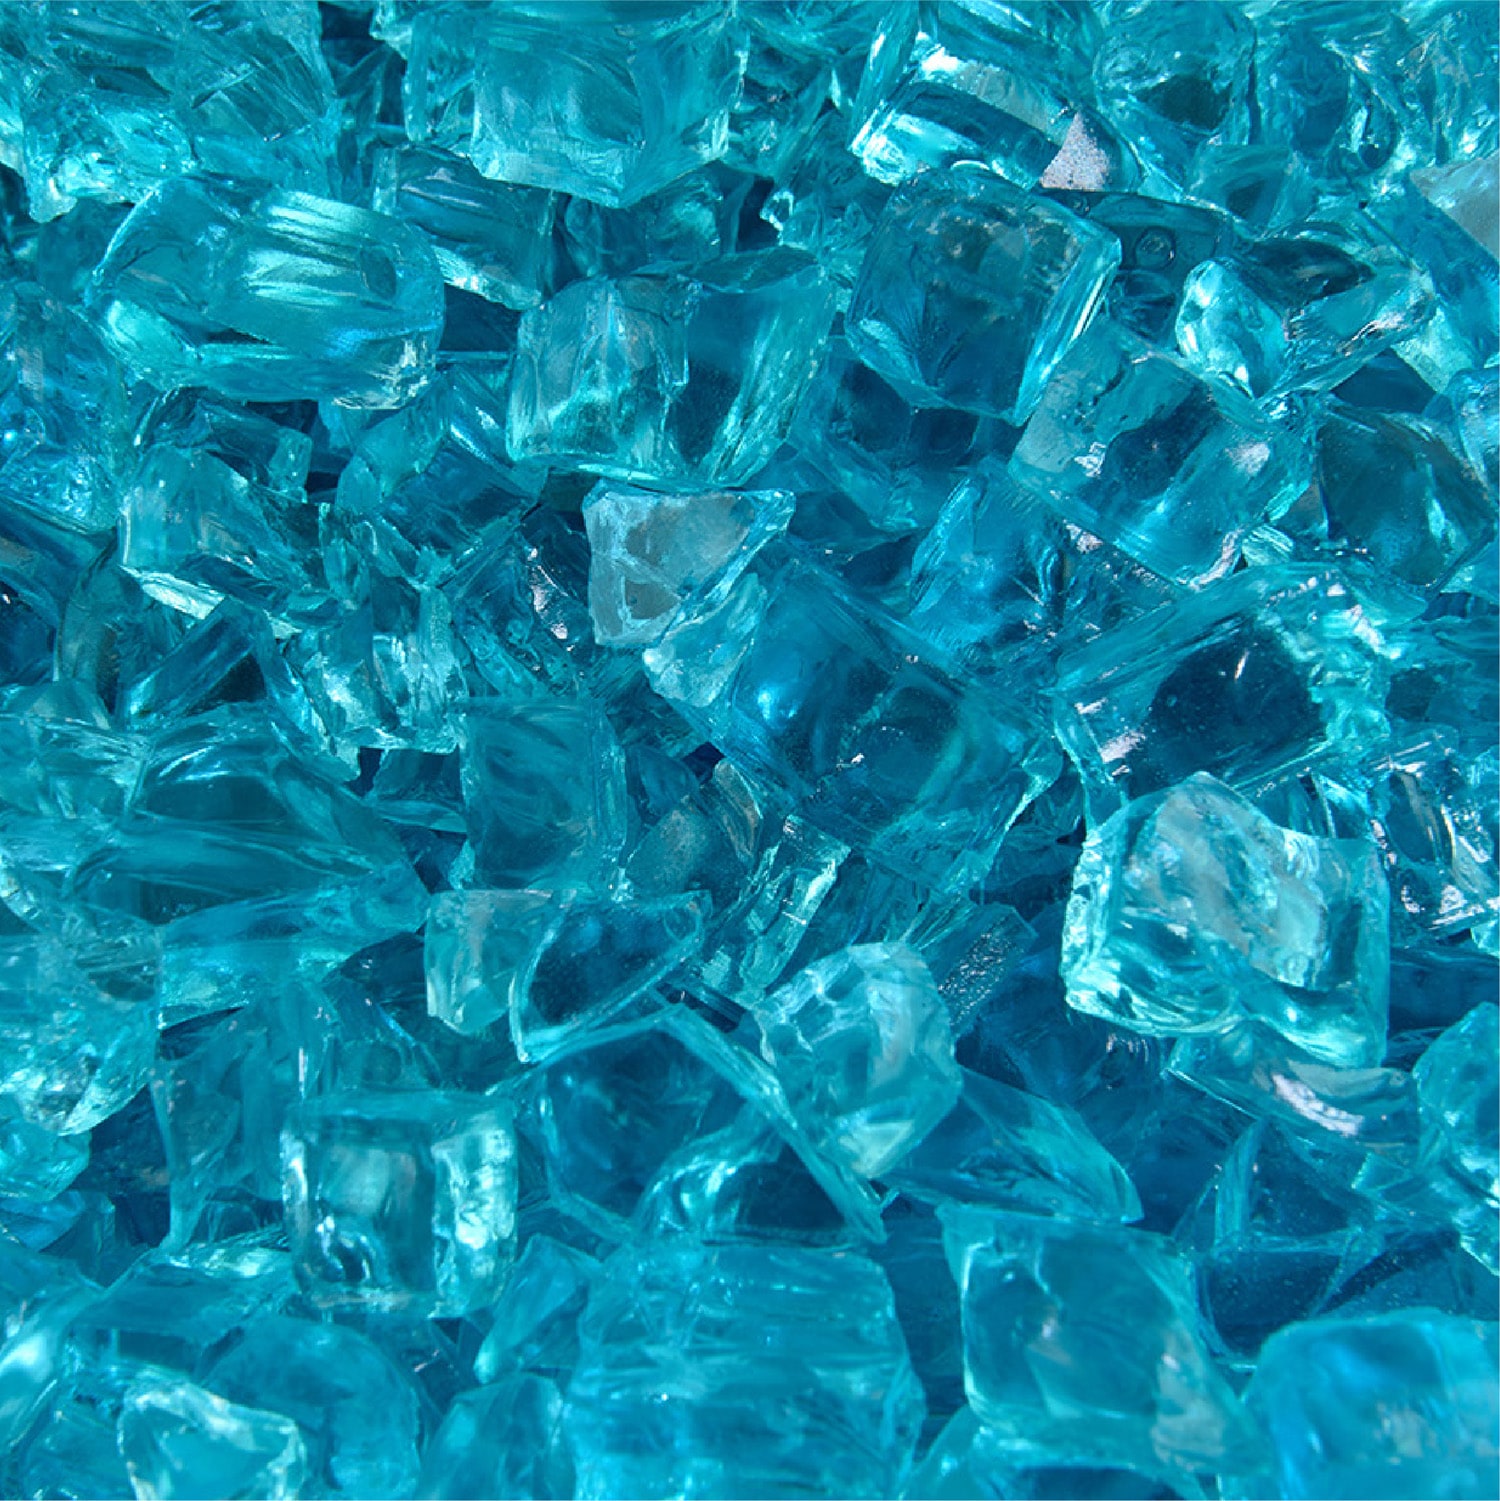 Fire Pit Essentials 10 lbs. Semi-Reflective Deep Sea Blue Fire Glass Beads for Indoor and Outdoor Fire Pits or Fireplaces